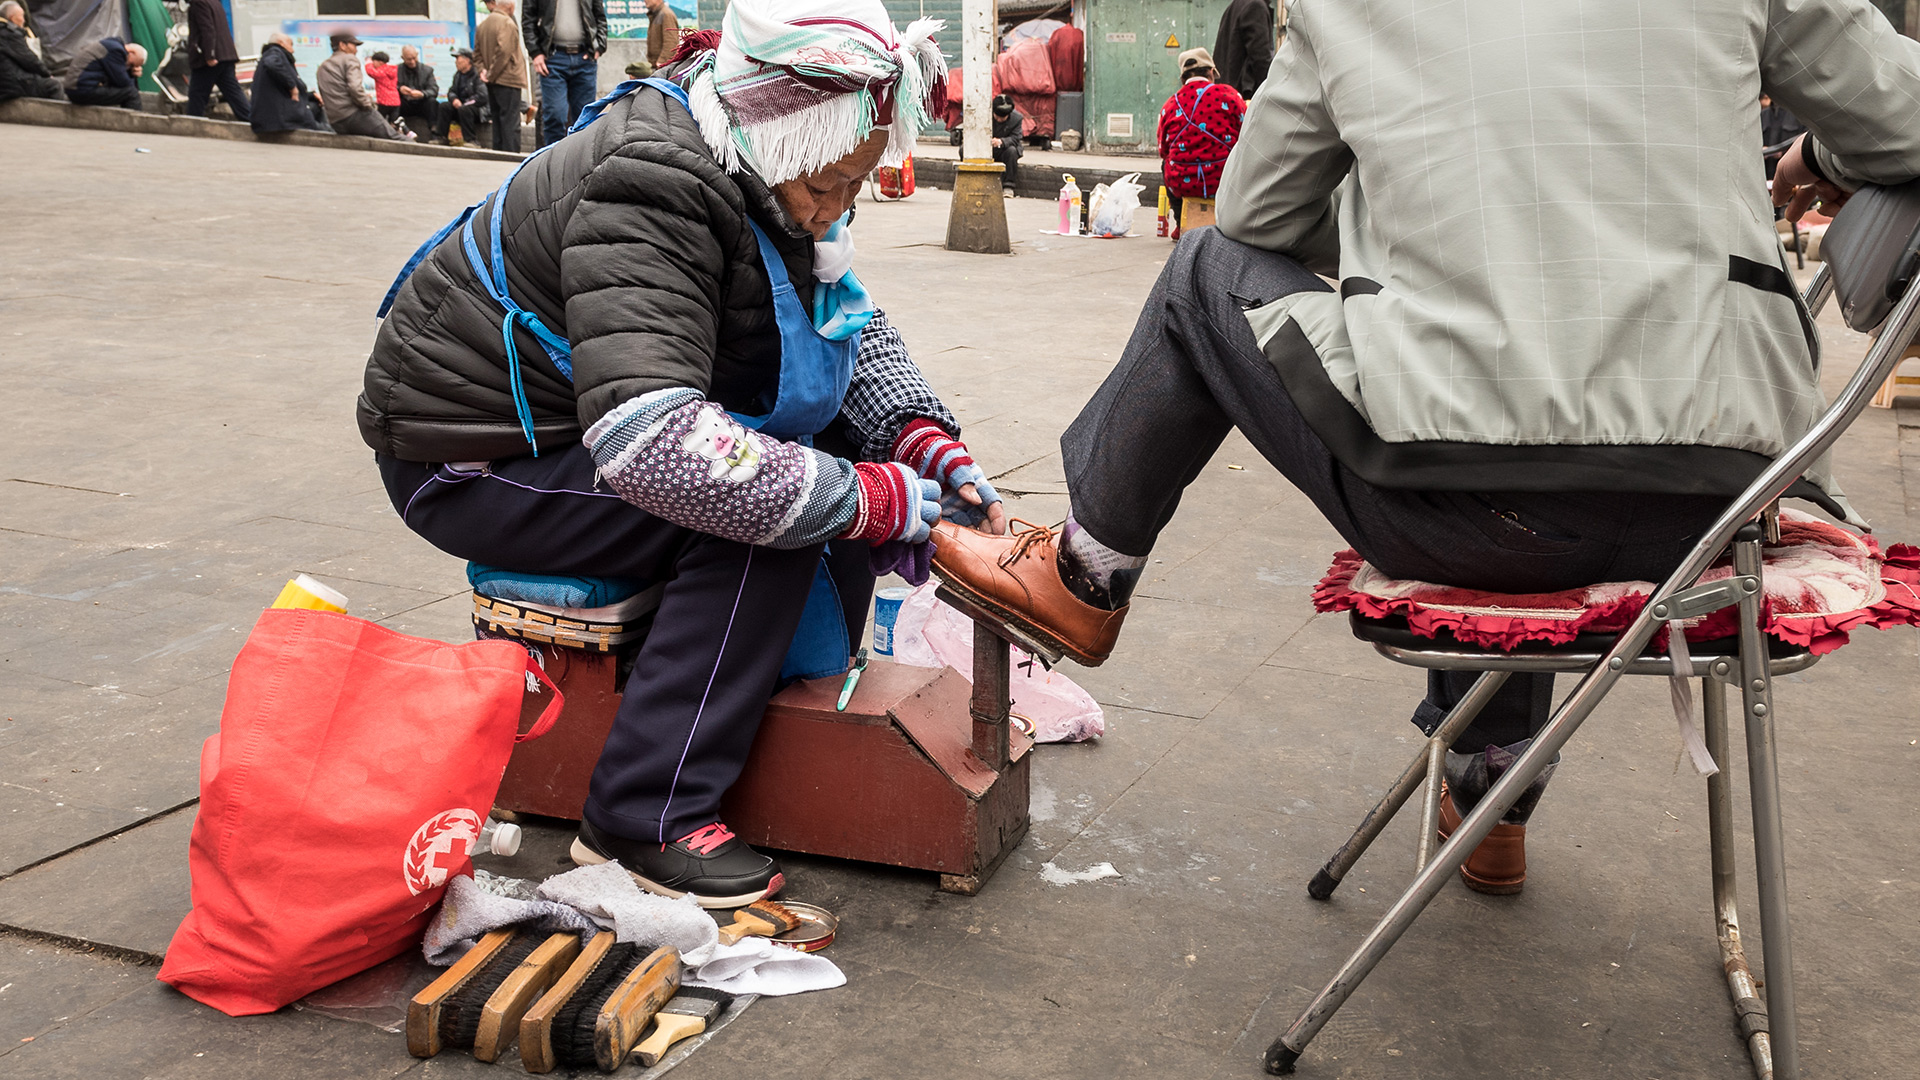 A Miao woman shines shoes on a street in East Asia. 